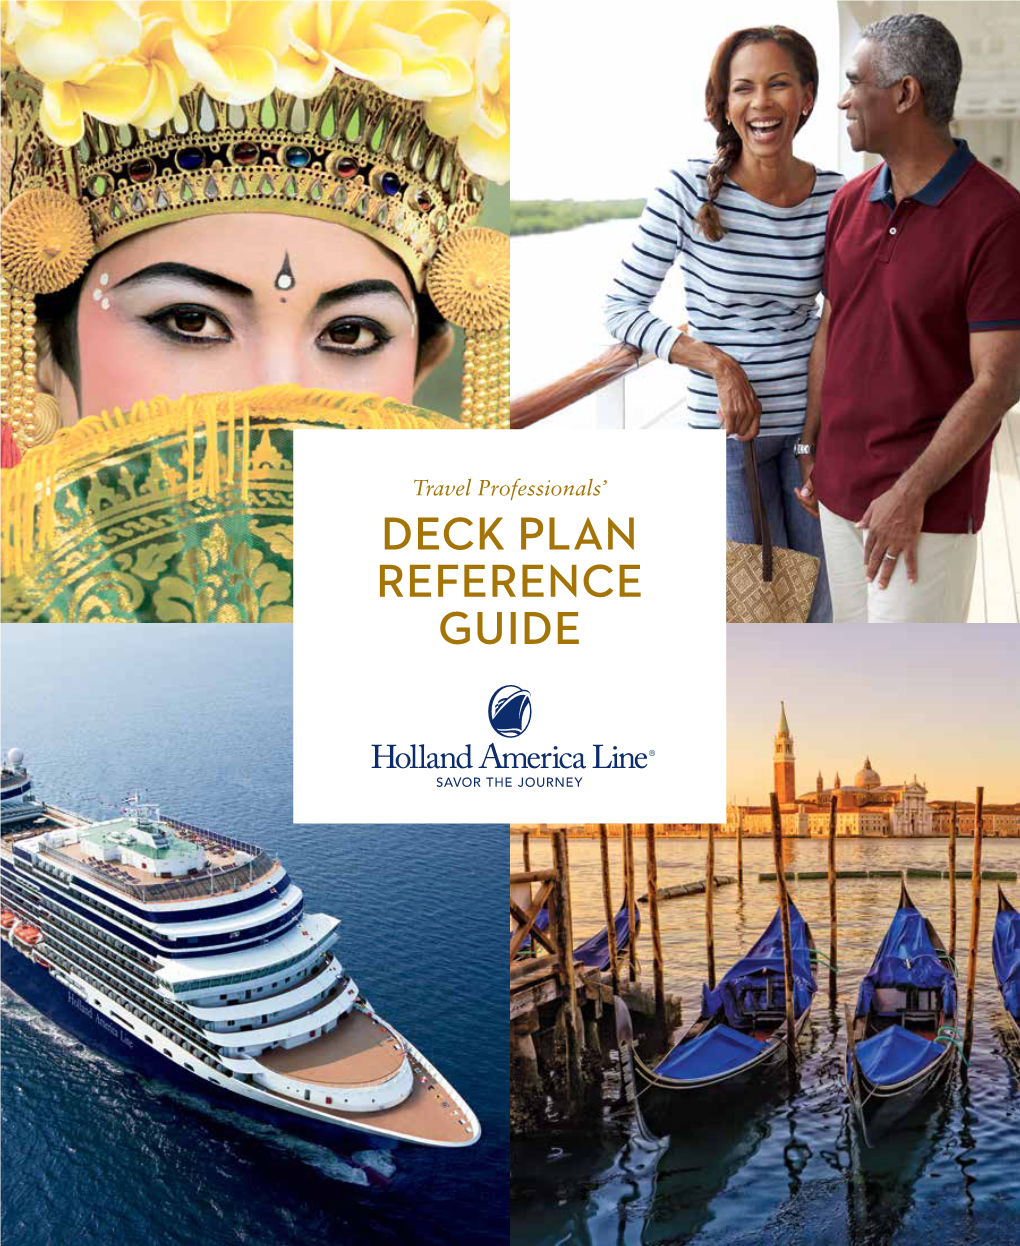 Deck Plan Reference Guide Enriching Journeys Enjoyed in Classic Style